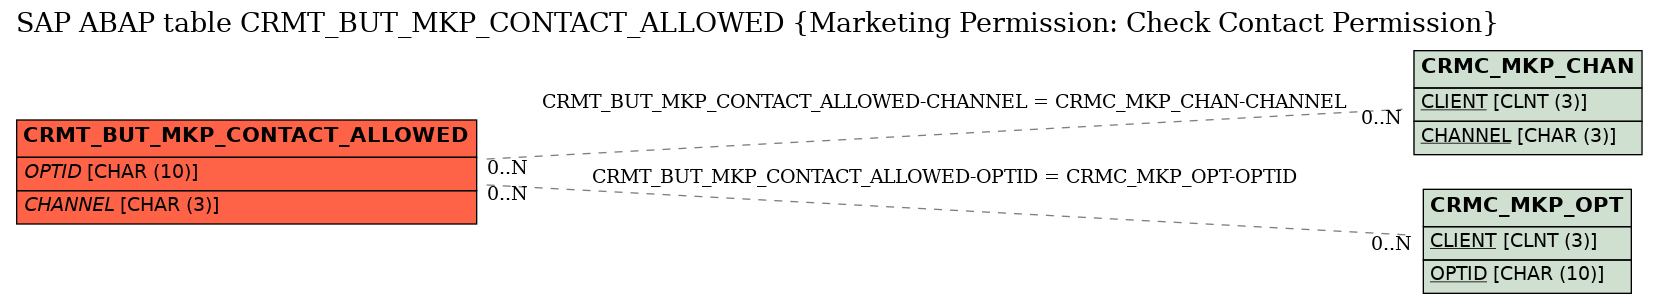 E-R Diagram for table CRMT_BUT_MKP_CONTACT_ALLOWED (Marketing Permission: Check Contact Permission)